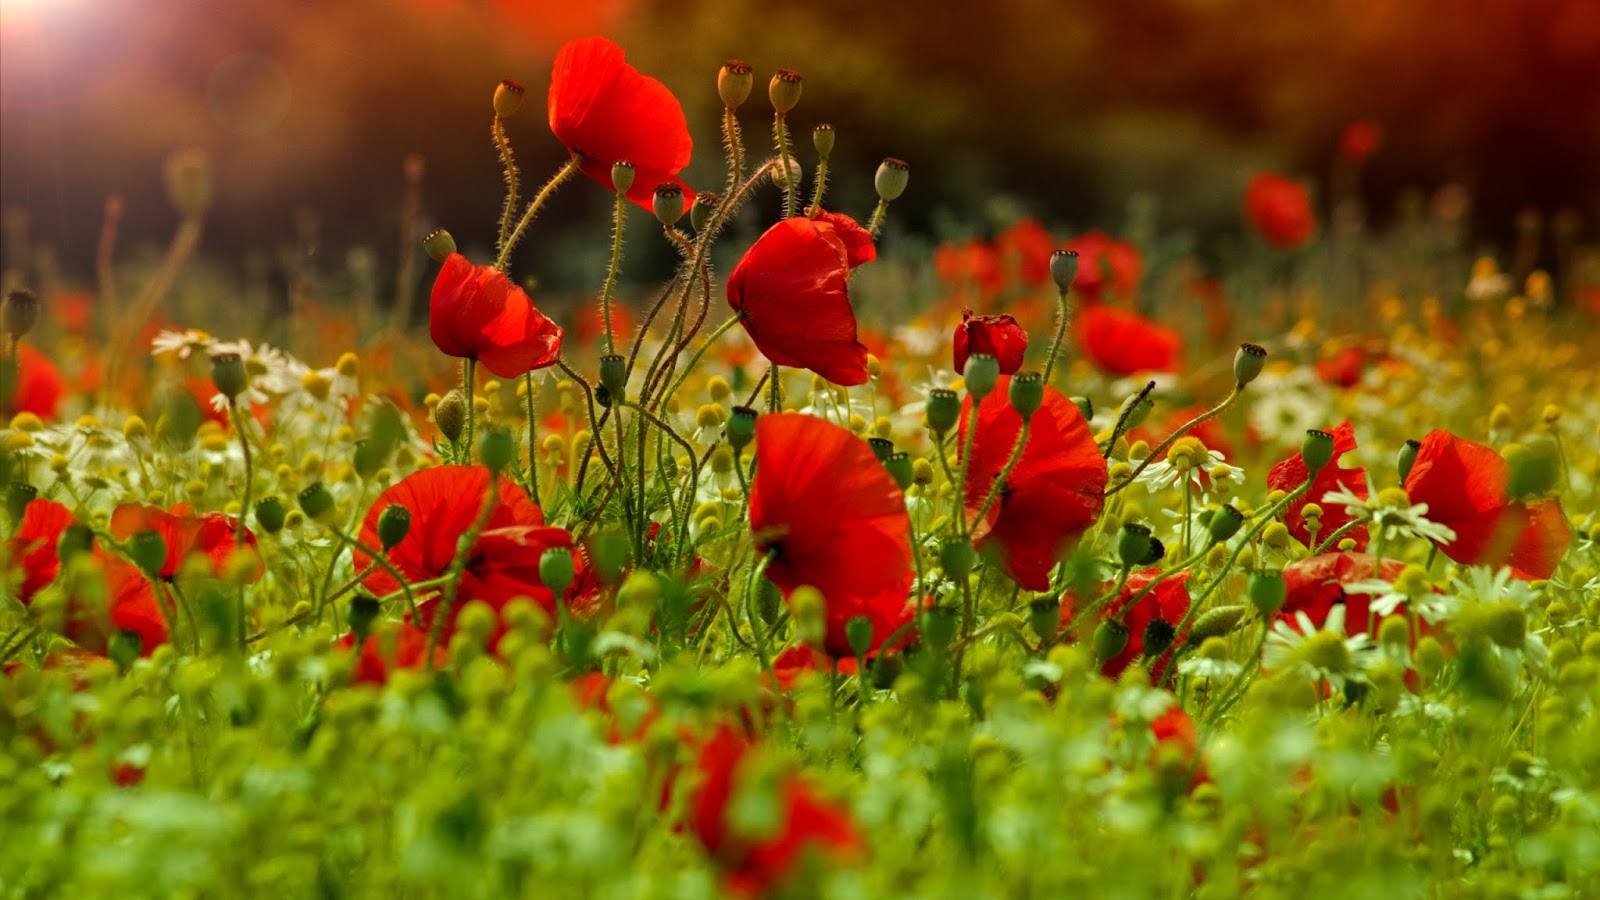 Red poppies (10 pictures)|Pictures of flowers